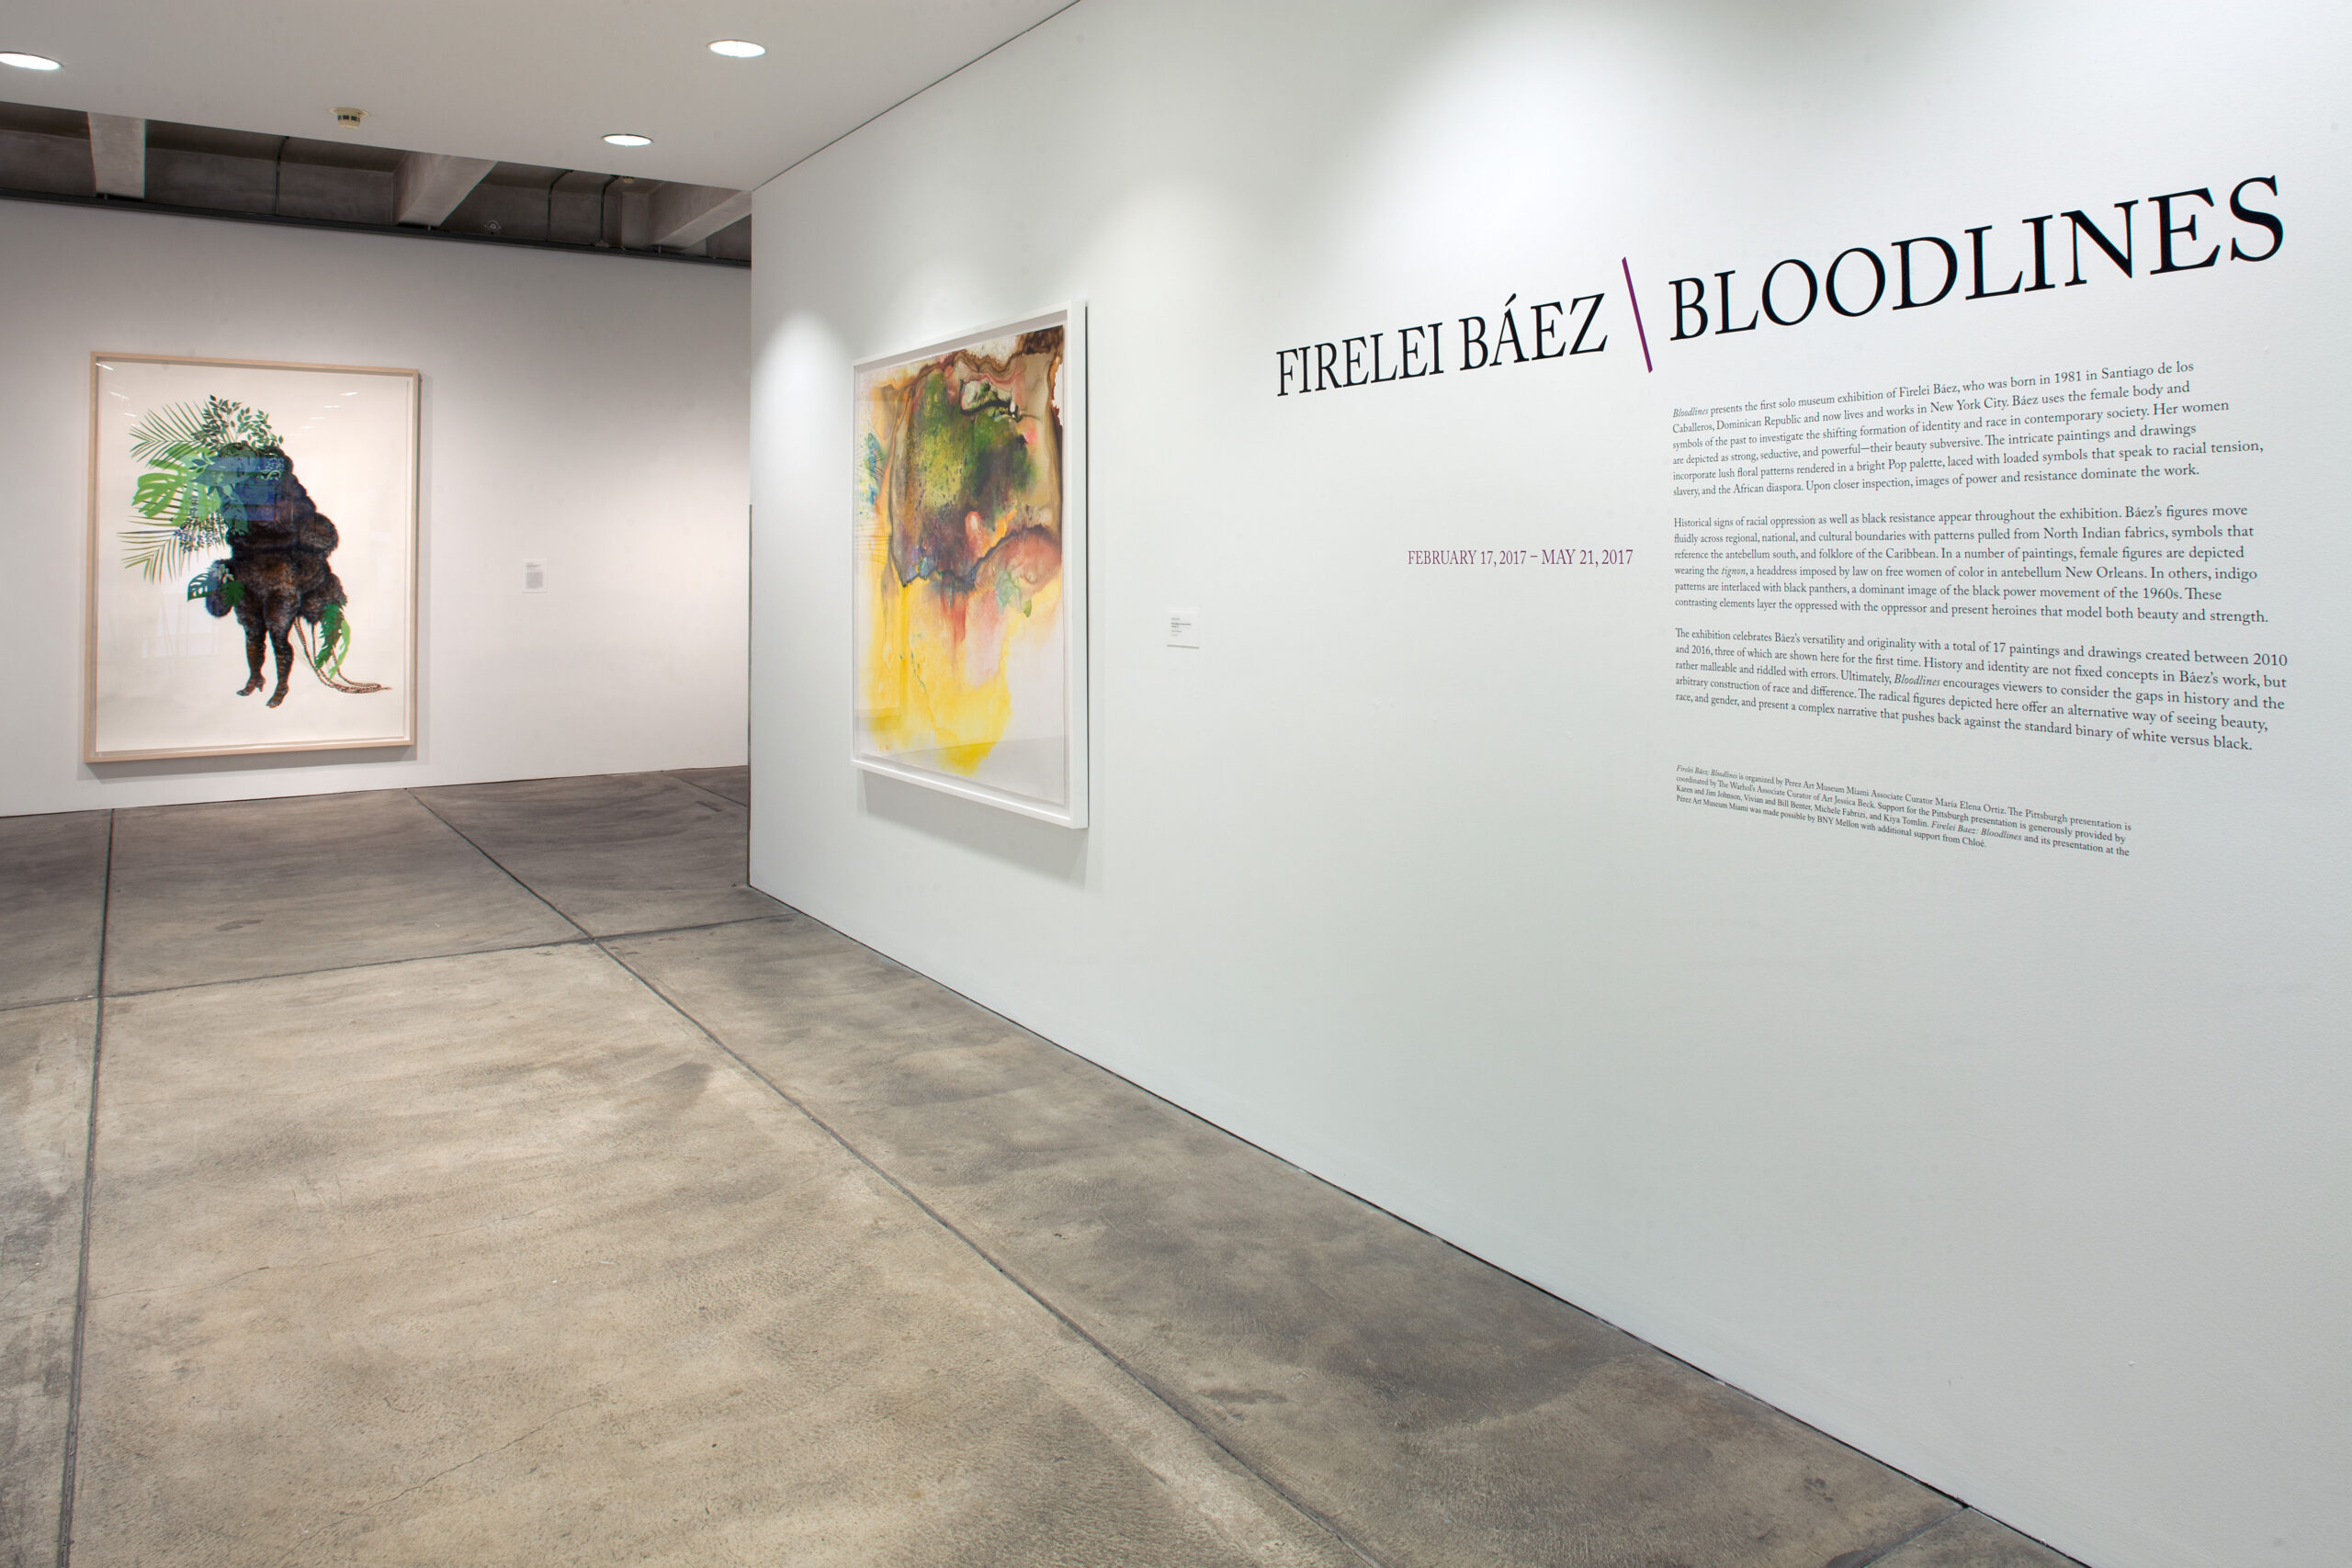 A gallery featuring wall text explaining Firelei Baez's Bloodlines exhibition and two large abstract paintings by the artist.